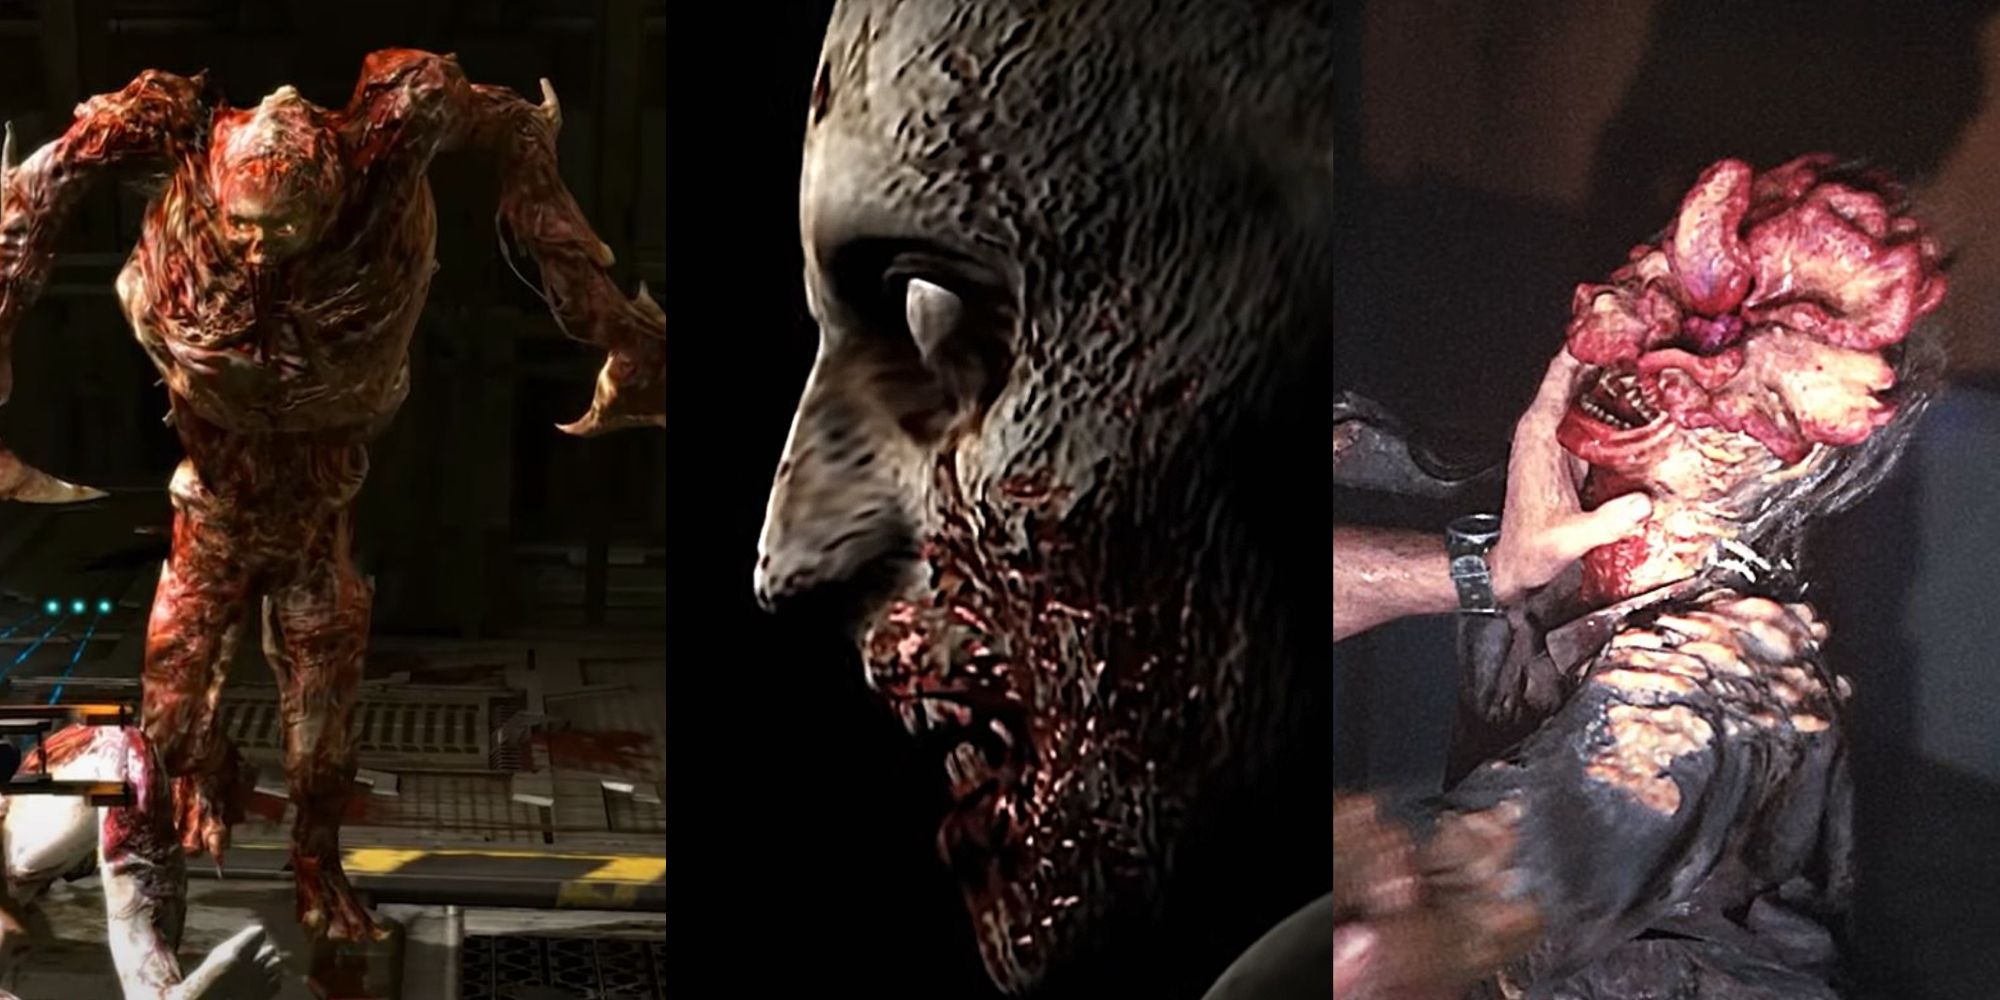 Necromorph from Dead Space, T-Virus Zombie from Resident Evil, and Clicker from The Last of Us